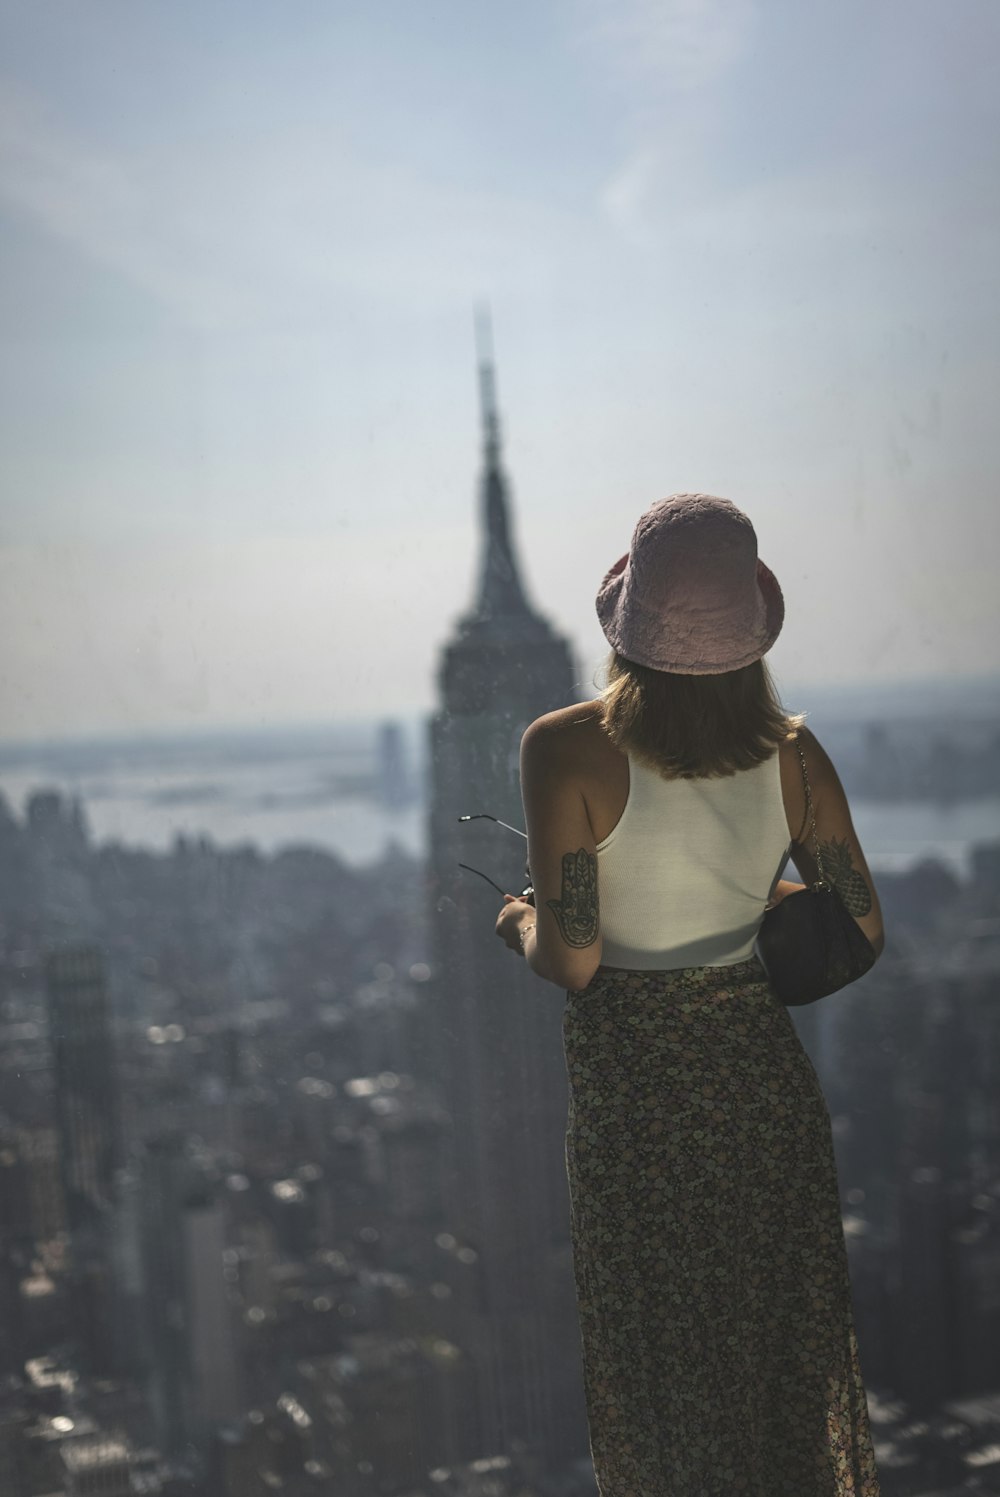 a person standing on a balcony overlooking a city